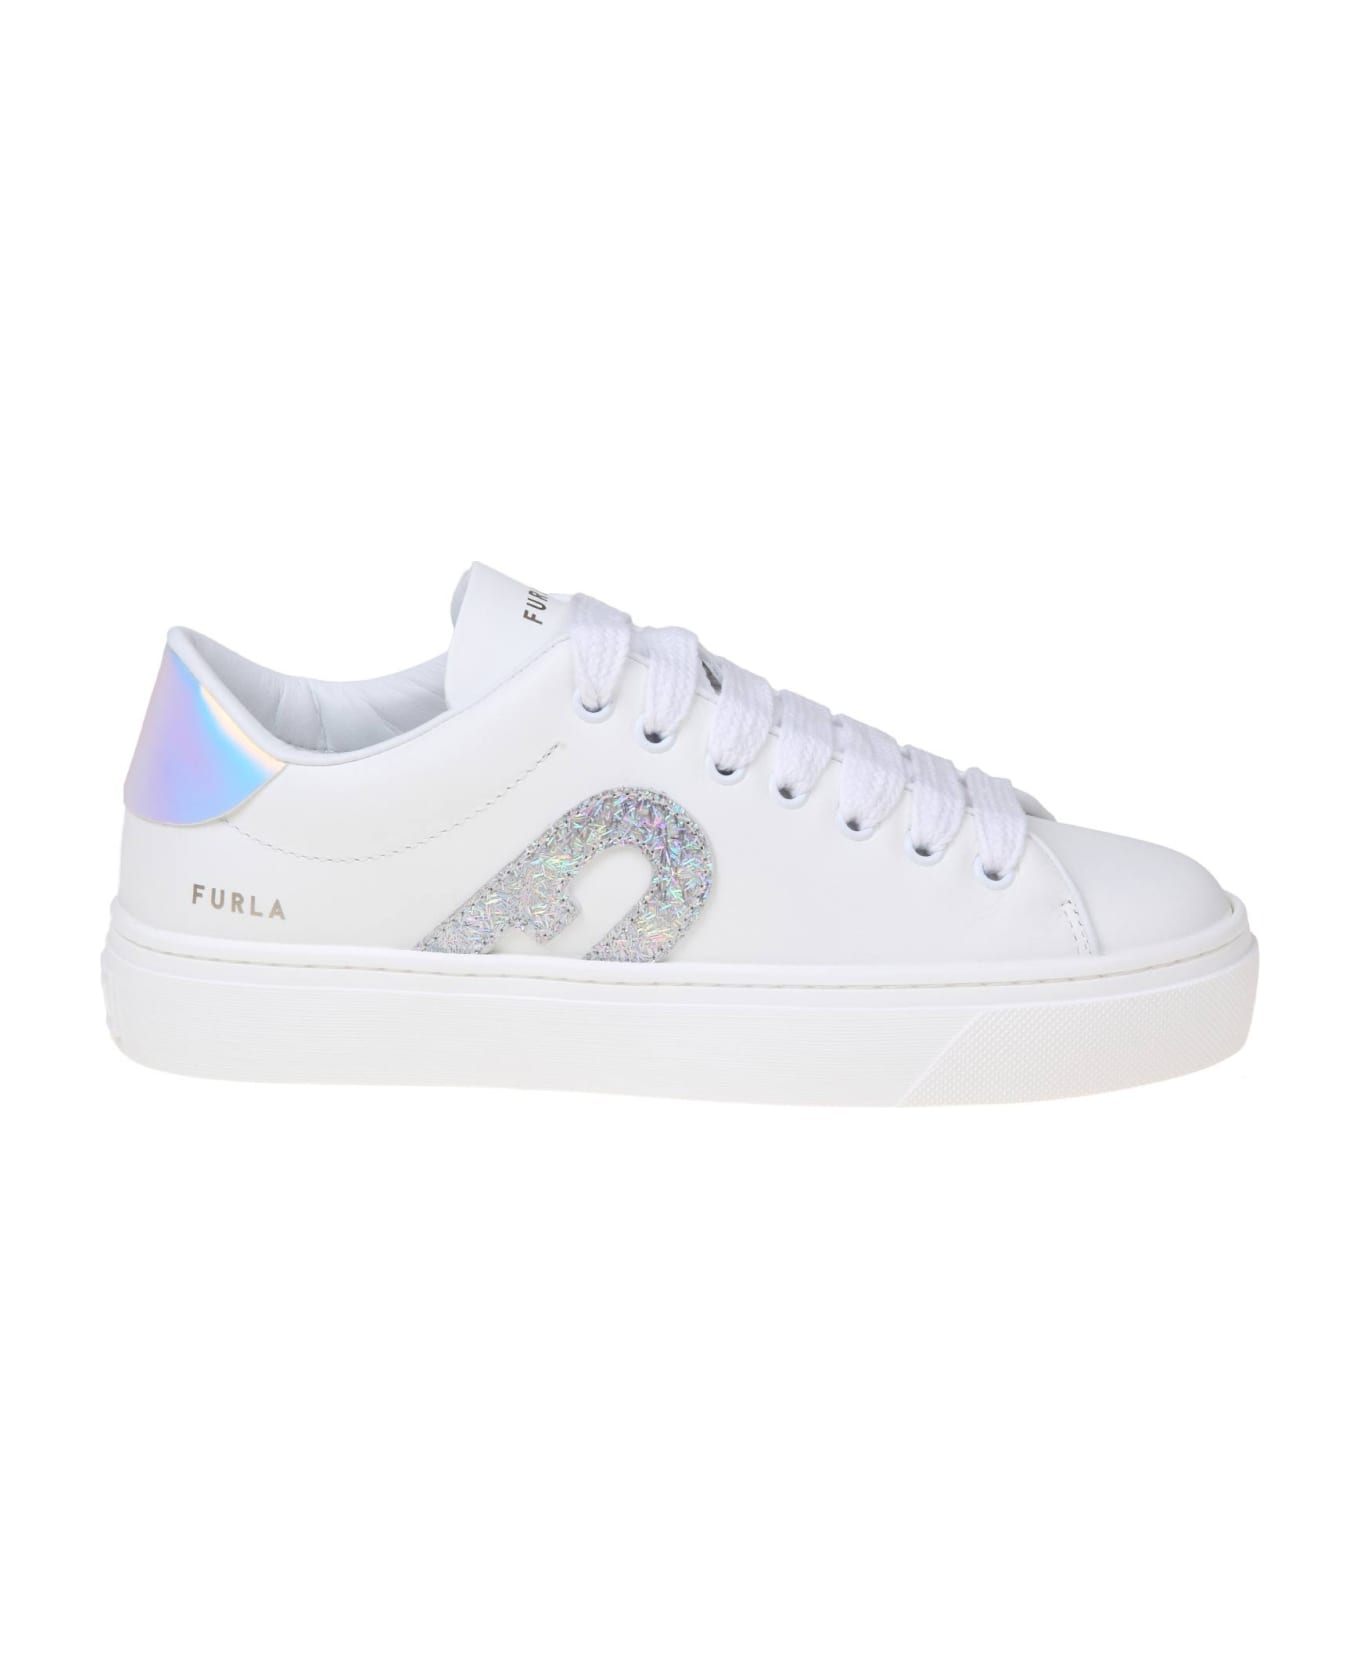 Furla Joy Lace Up Sneakers In White Leather - Yellow Cream